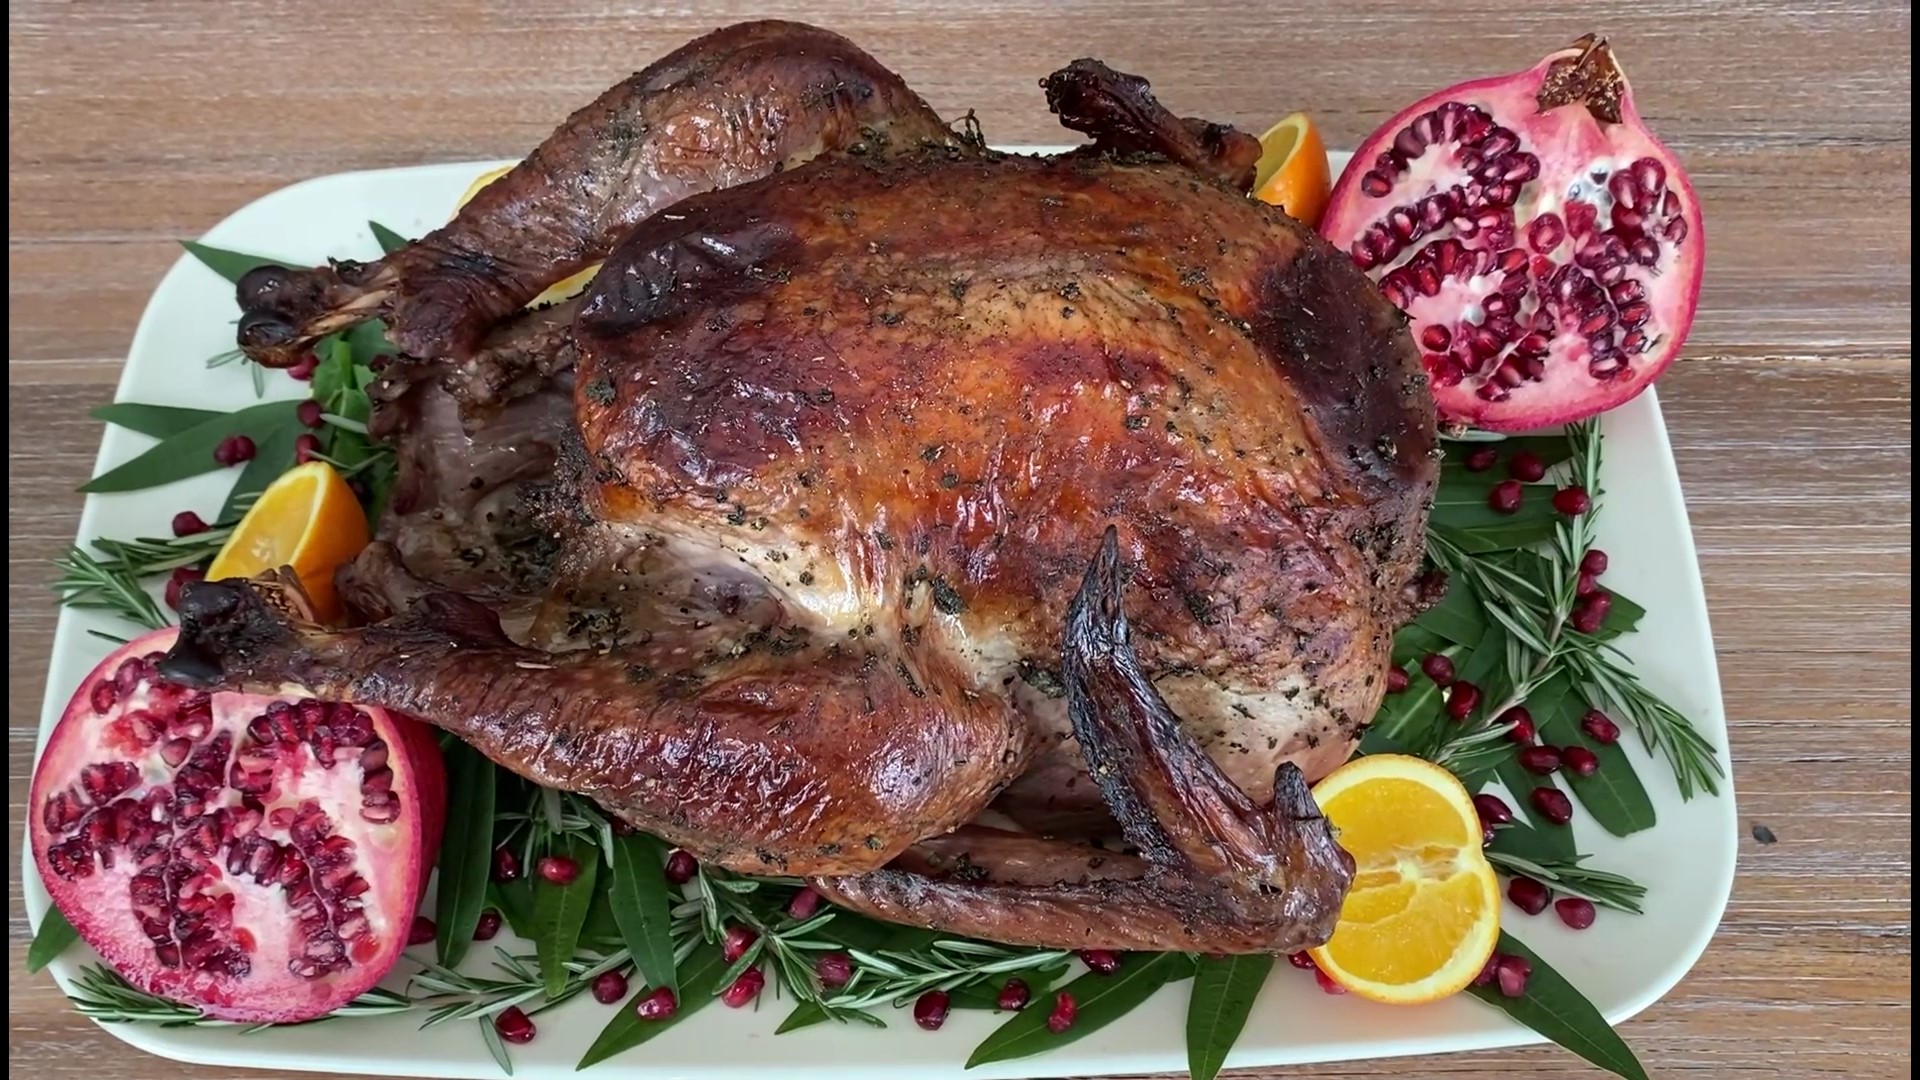 Pomegranate-brined turkey is a unique take on a holiday staple. Sponsored by Parker's Plate.